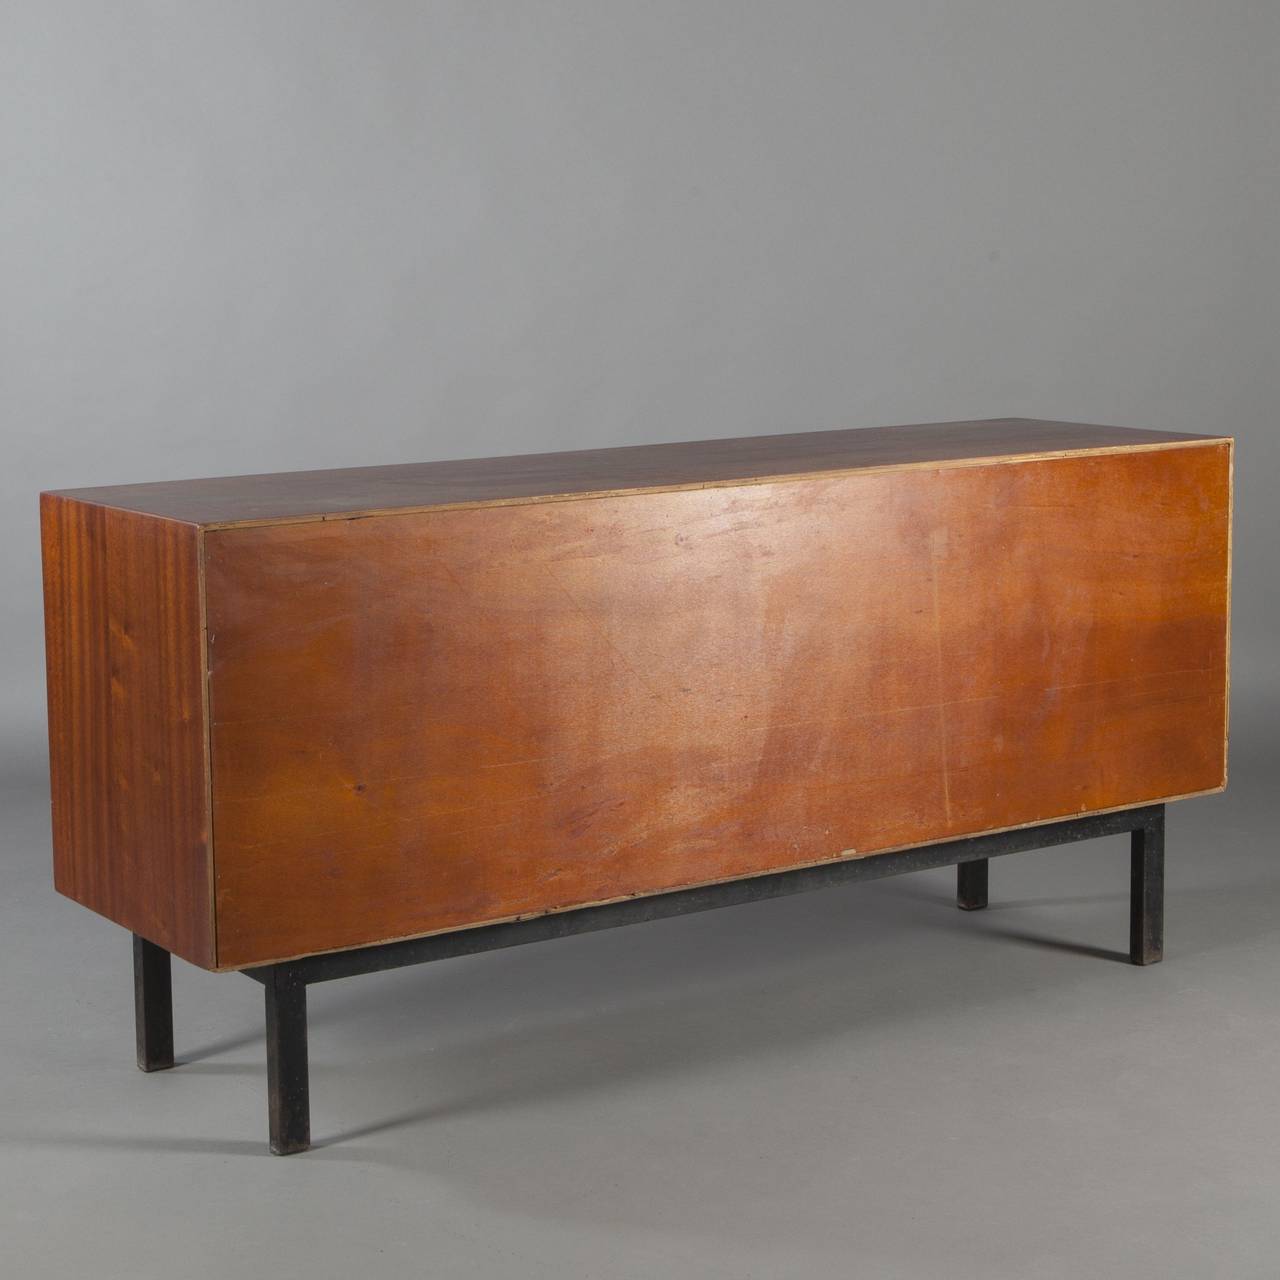 Charlotte Perriand, Enfilade Cabinet Known as 